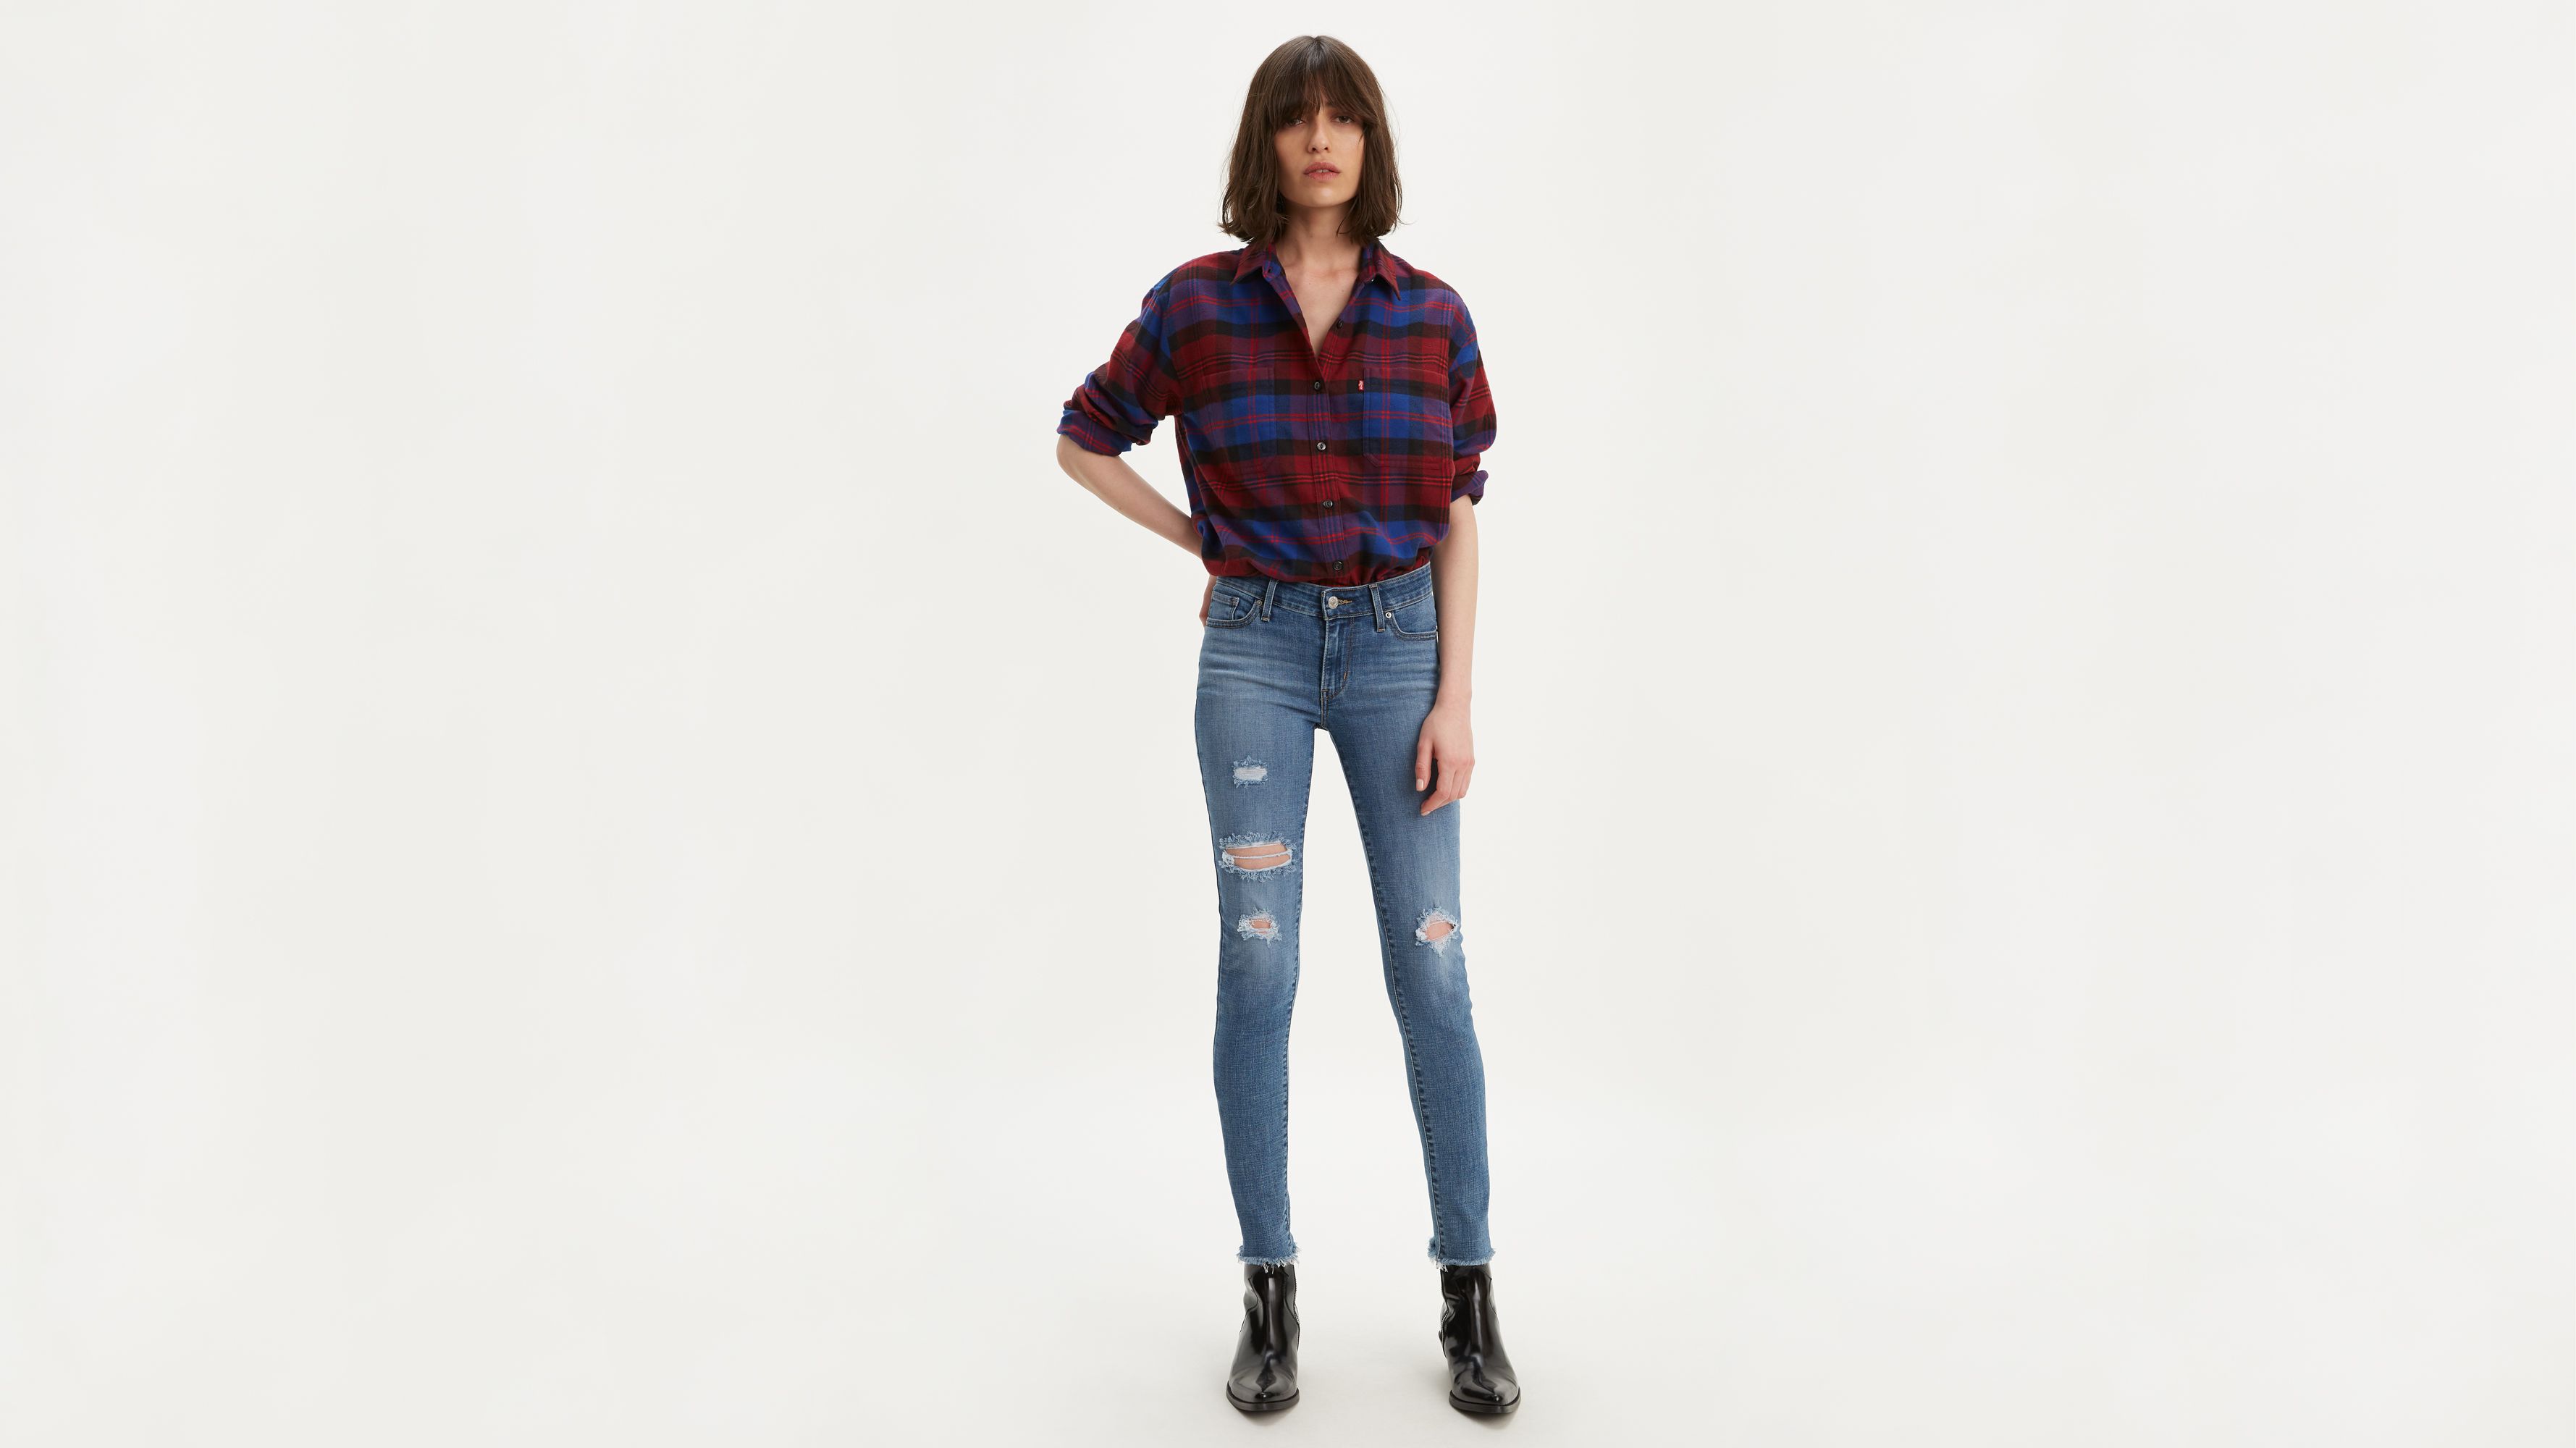 levis skinny ripped jeans